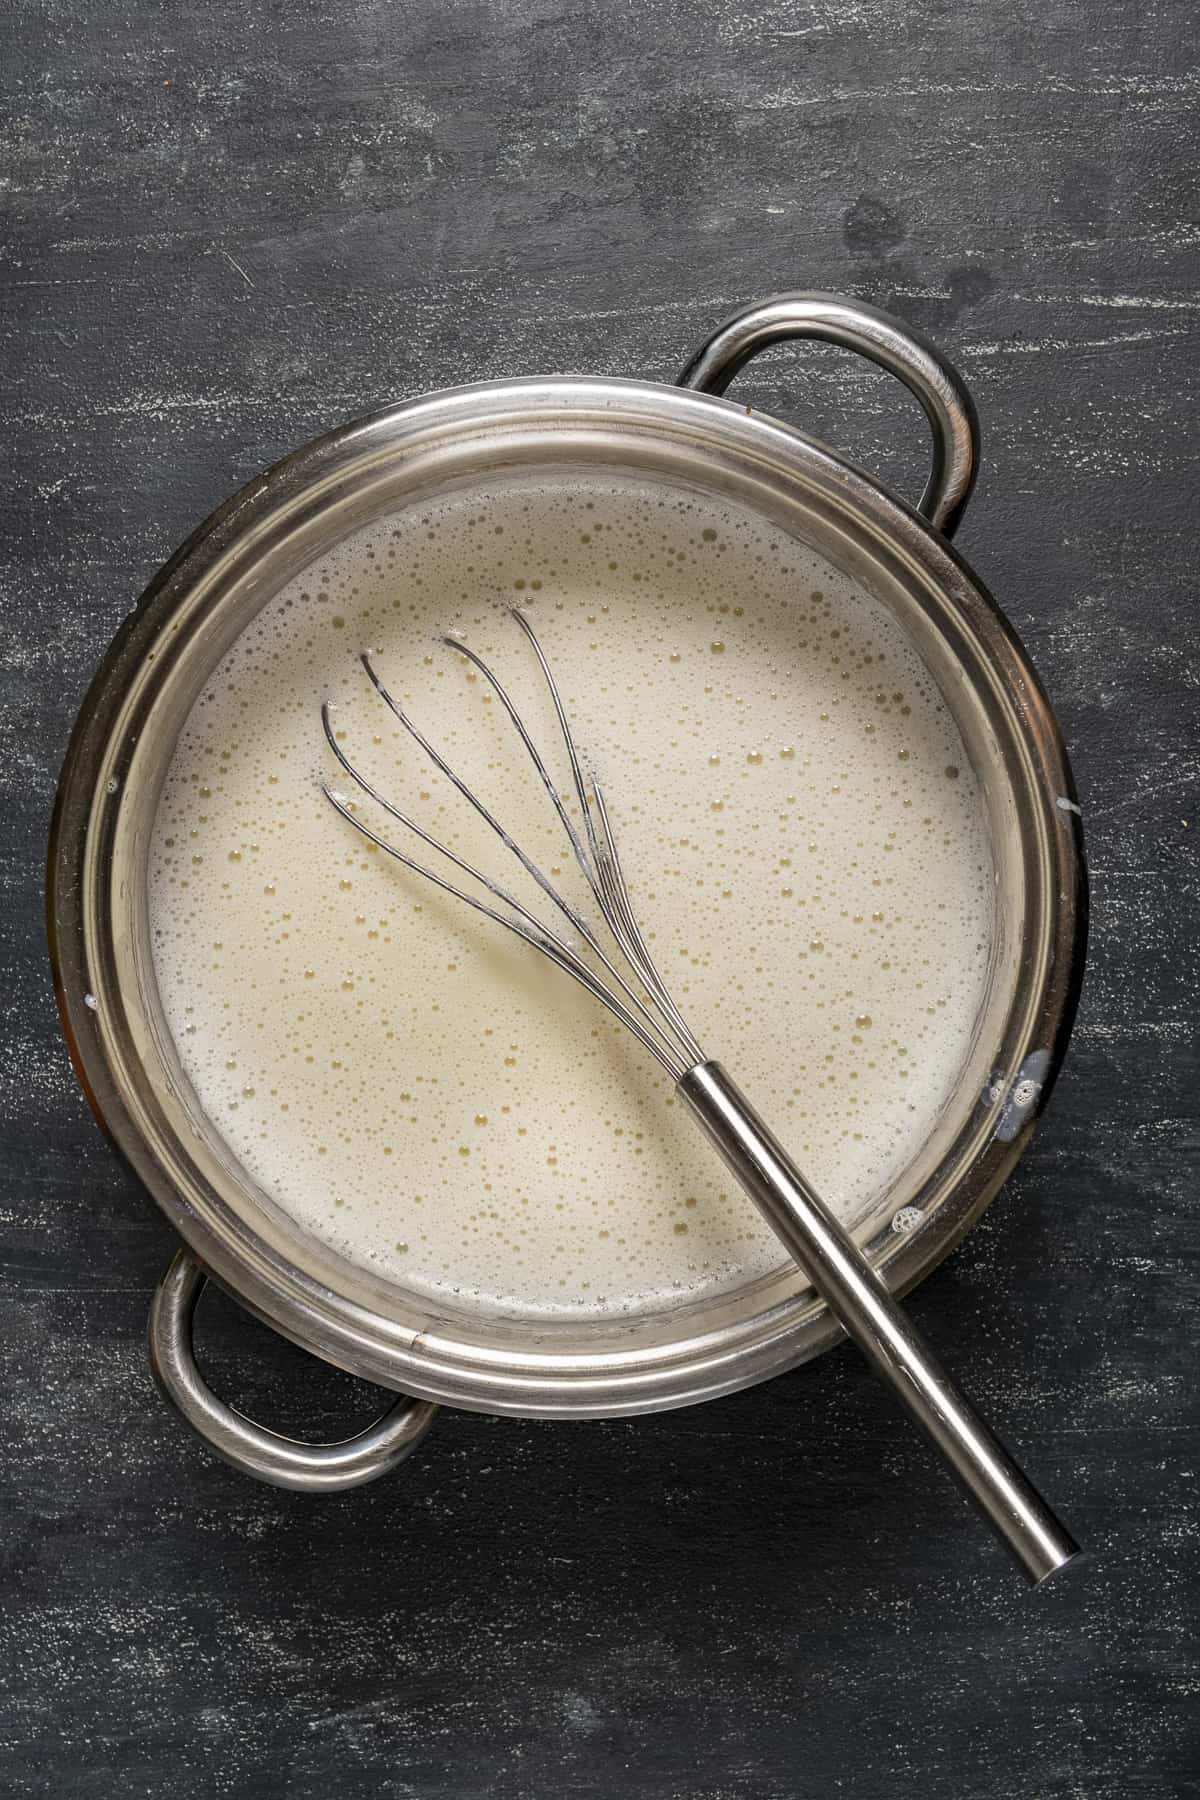 Salep in a saucepan and a hand whisk inside it.